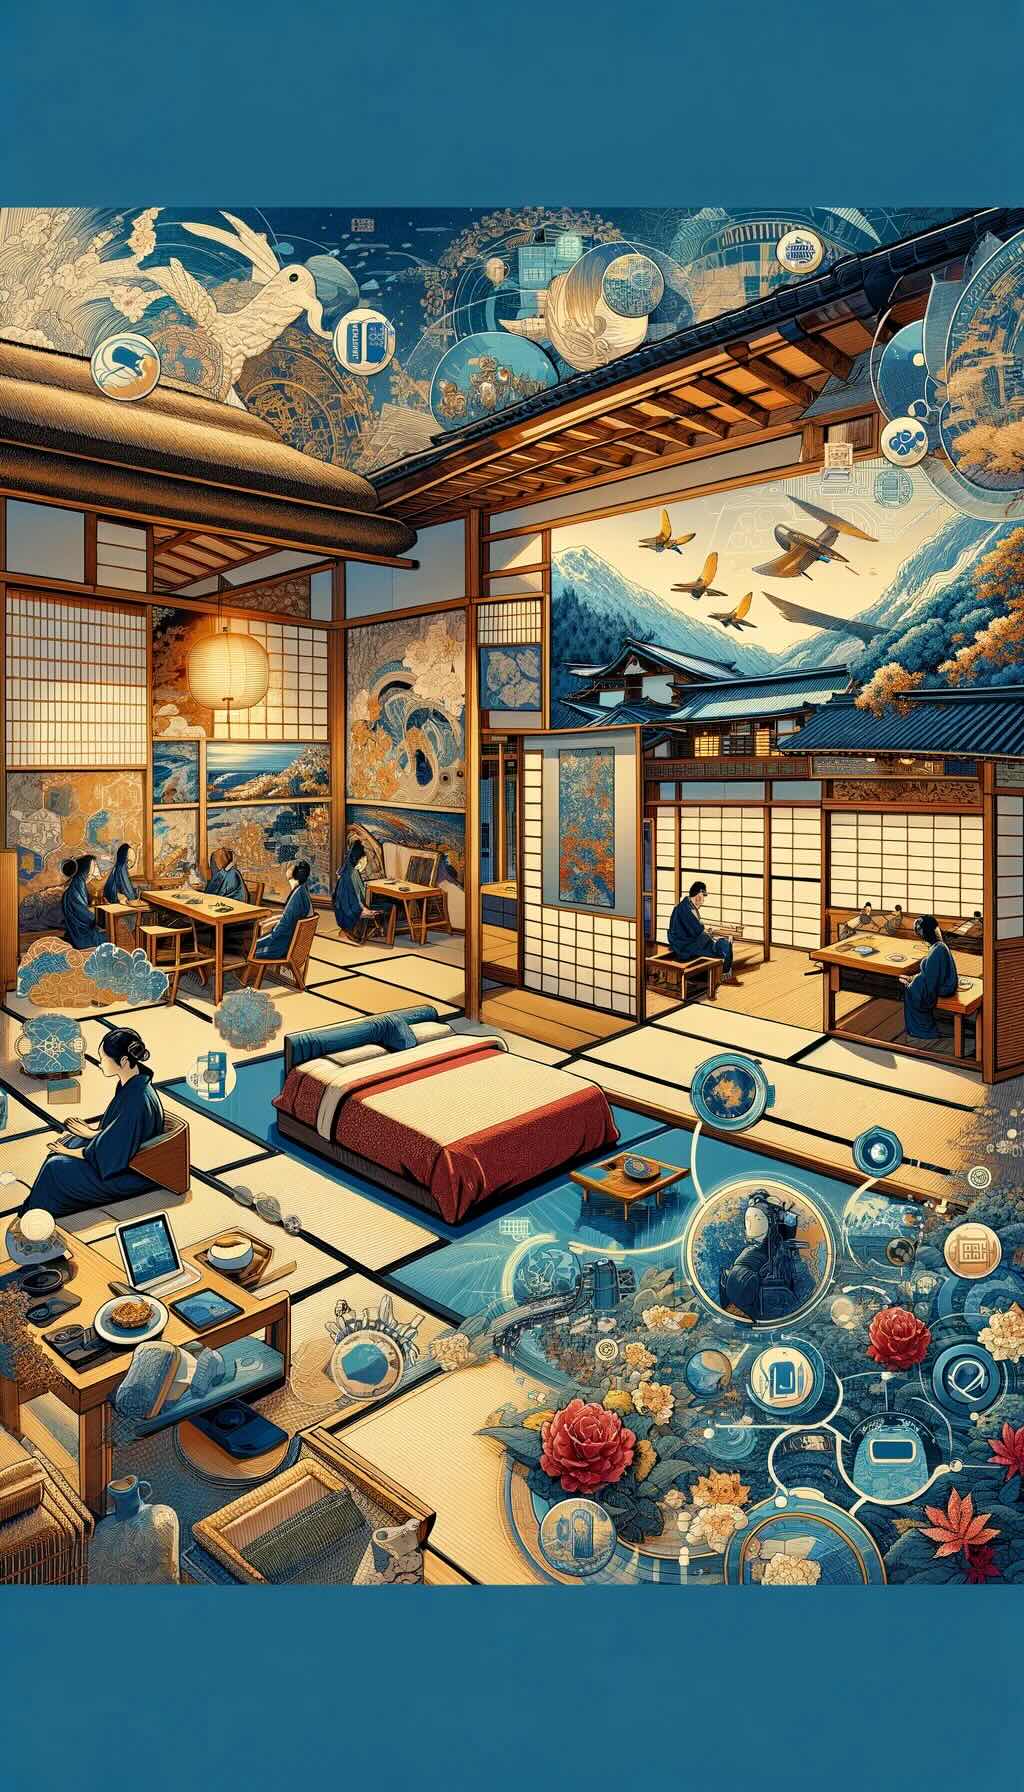 Innovative spirit of younger generations in ryokans, showcases a fusion of traditional and contemporary elements within a ryokan setting, such as modern design elements in tatami rooms and the integration of technology in a serene ambiance. The artwork also illustrates storytelling through modern mediums, environmental sustainability practices, and collaborations with artists and cultural figures. This dynamic evolution of ryokans is depicted, balancing the richness of tradition with modern innovations and global perspectives